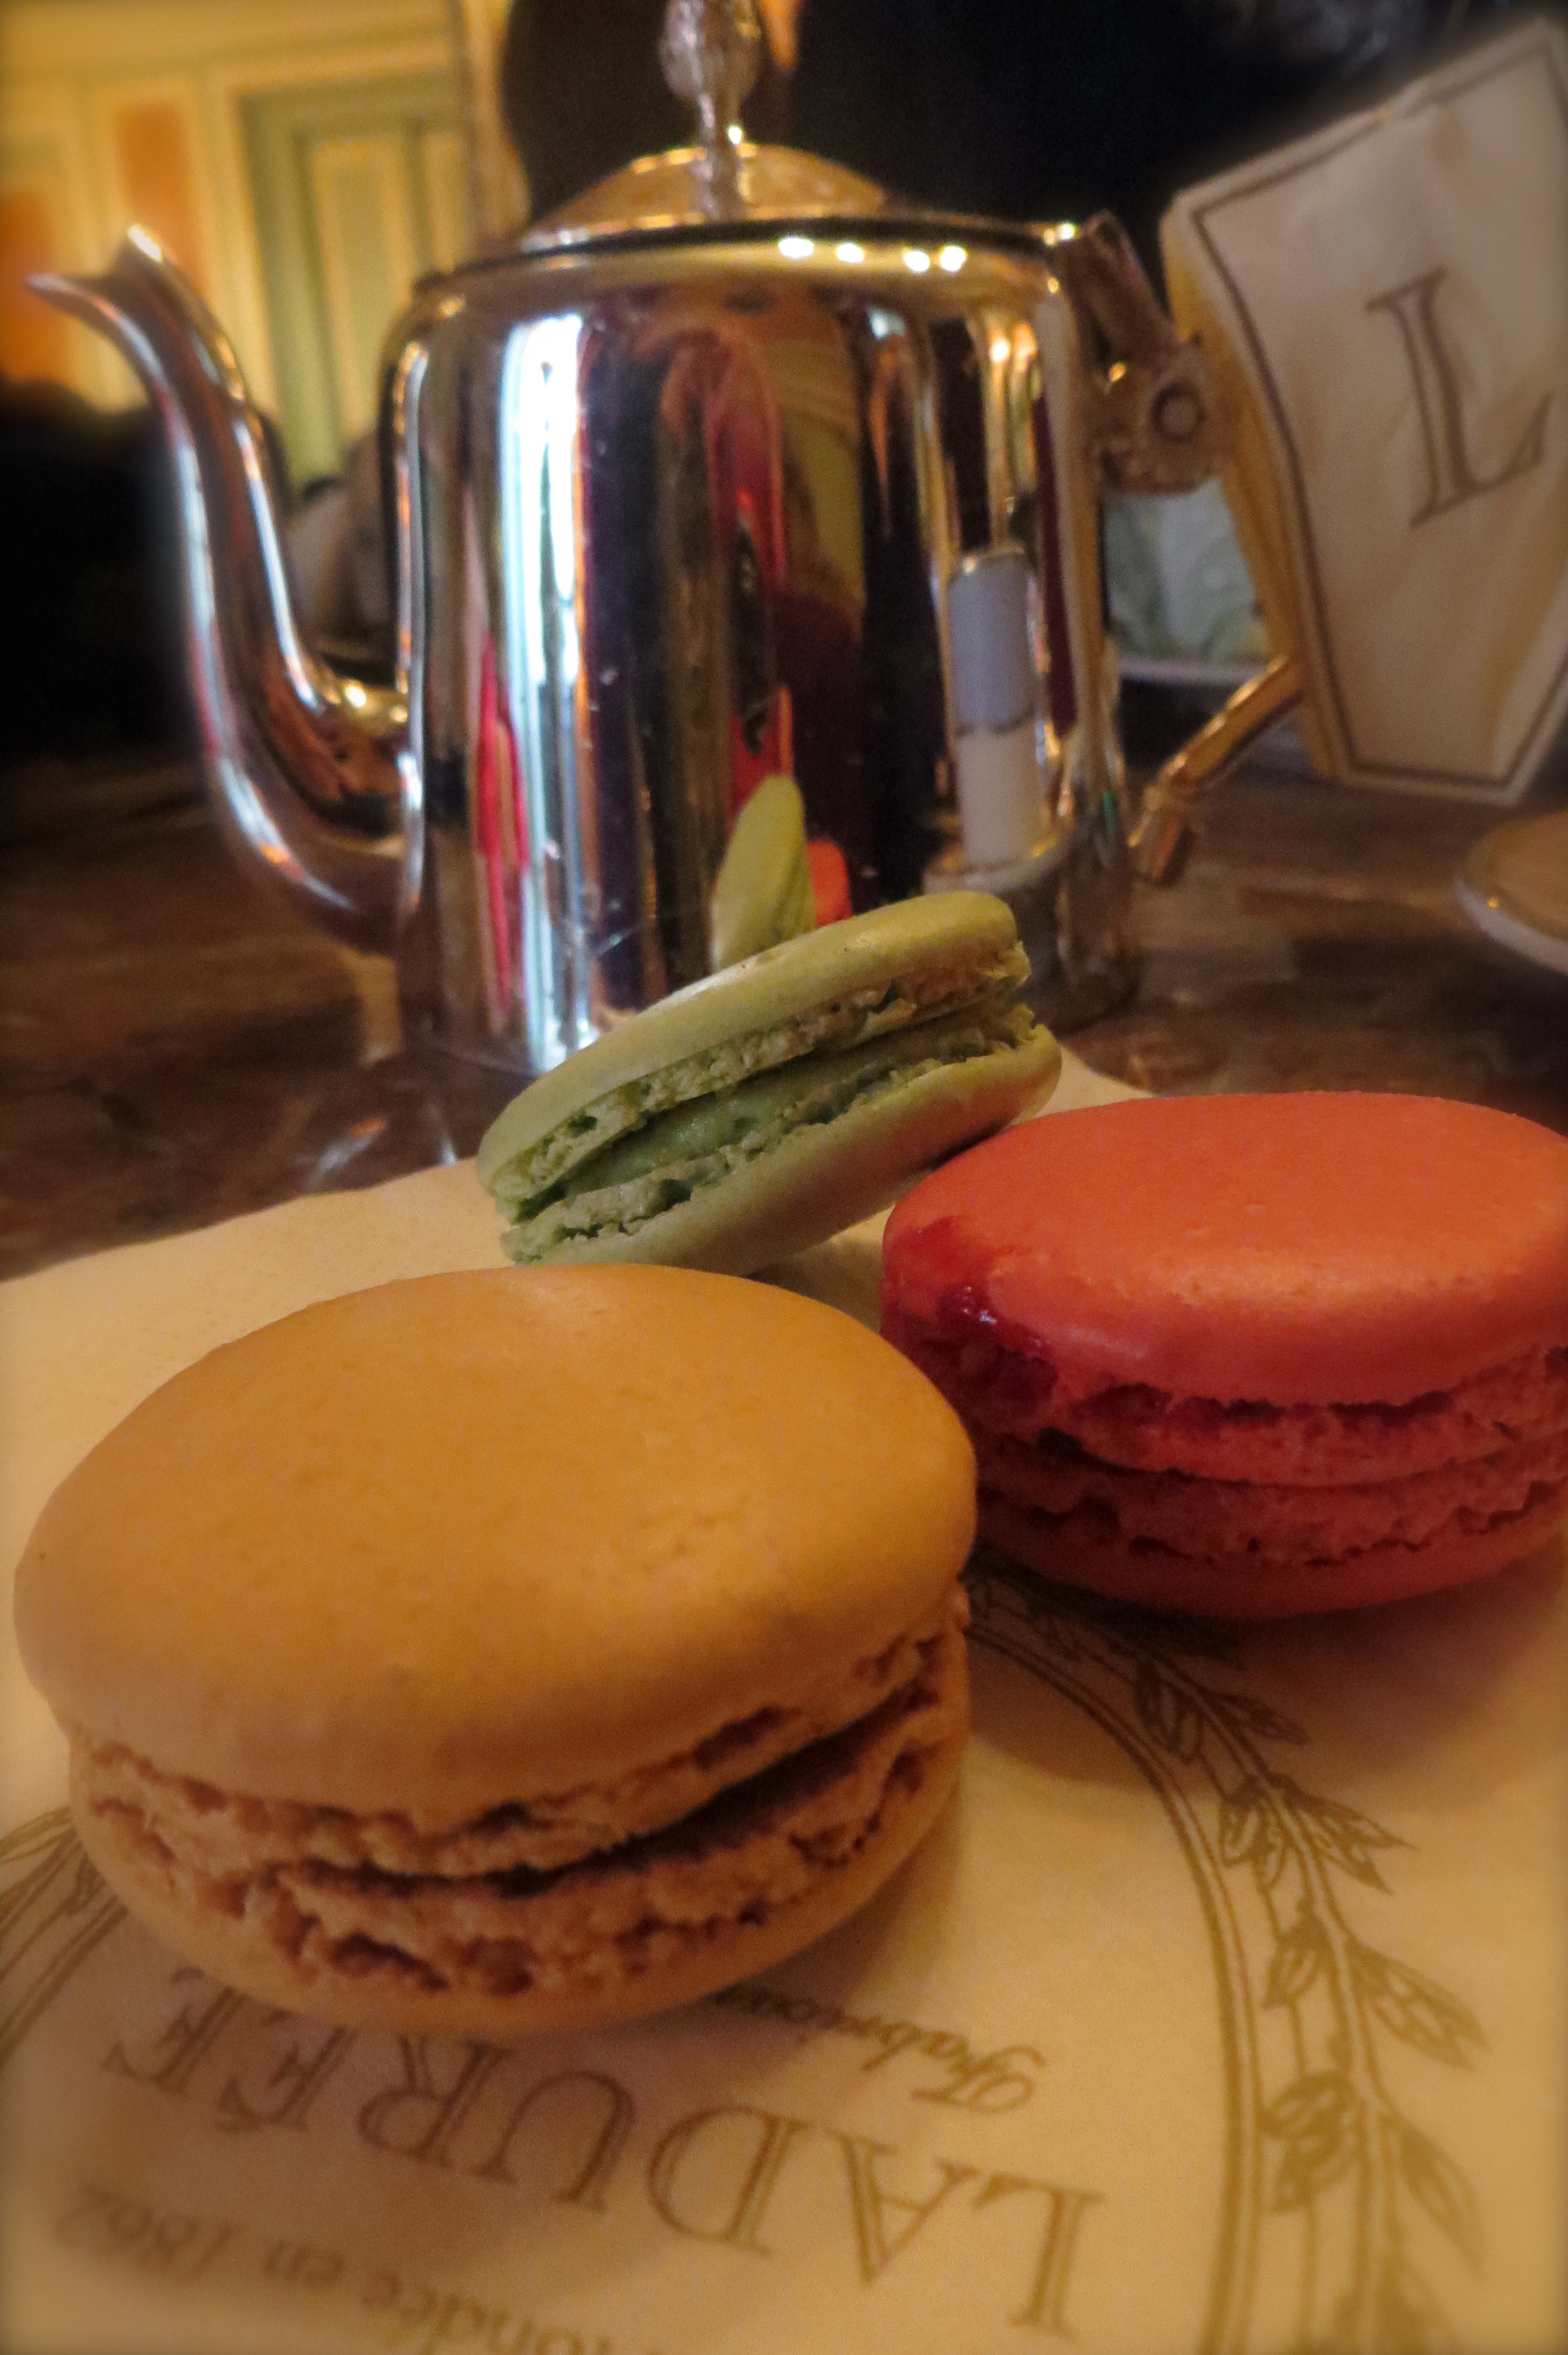 Trying the famous Ladurée macaroons and coffee in Paris